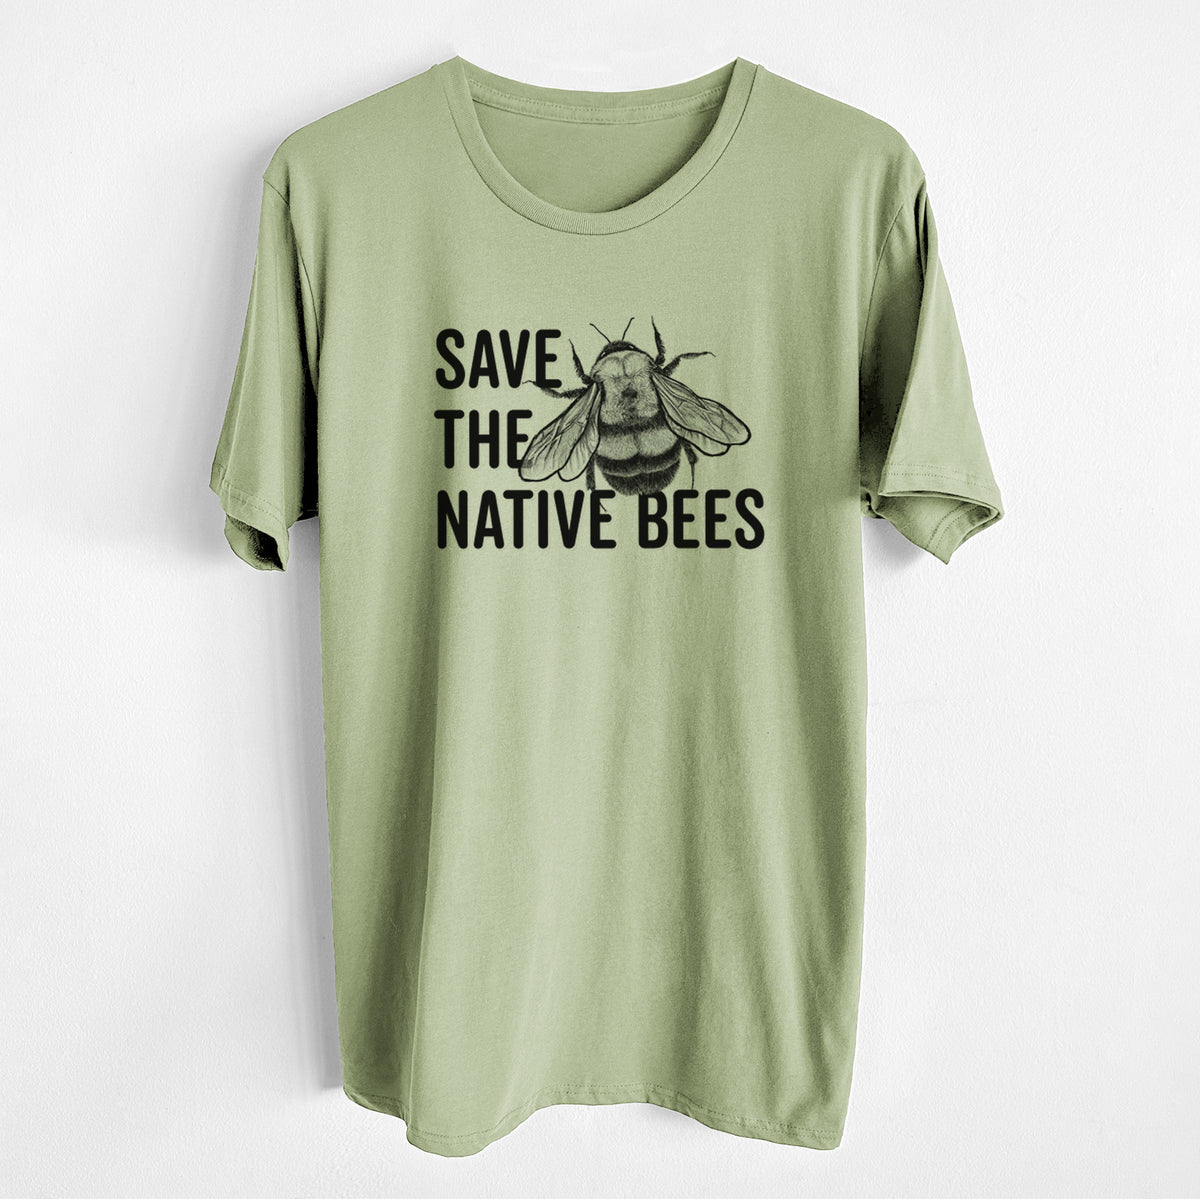 Save the Native Bees - Unisex Crewneck - Made in USA - 100% Organic Cotton